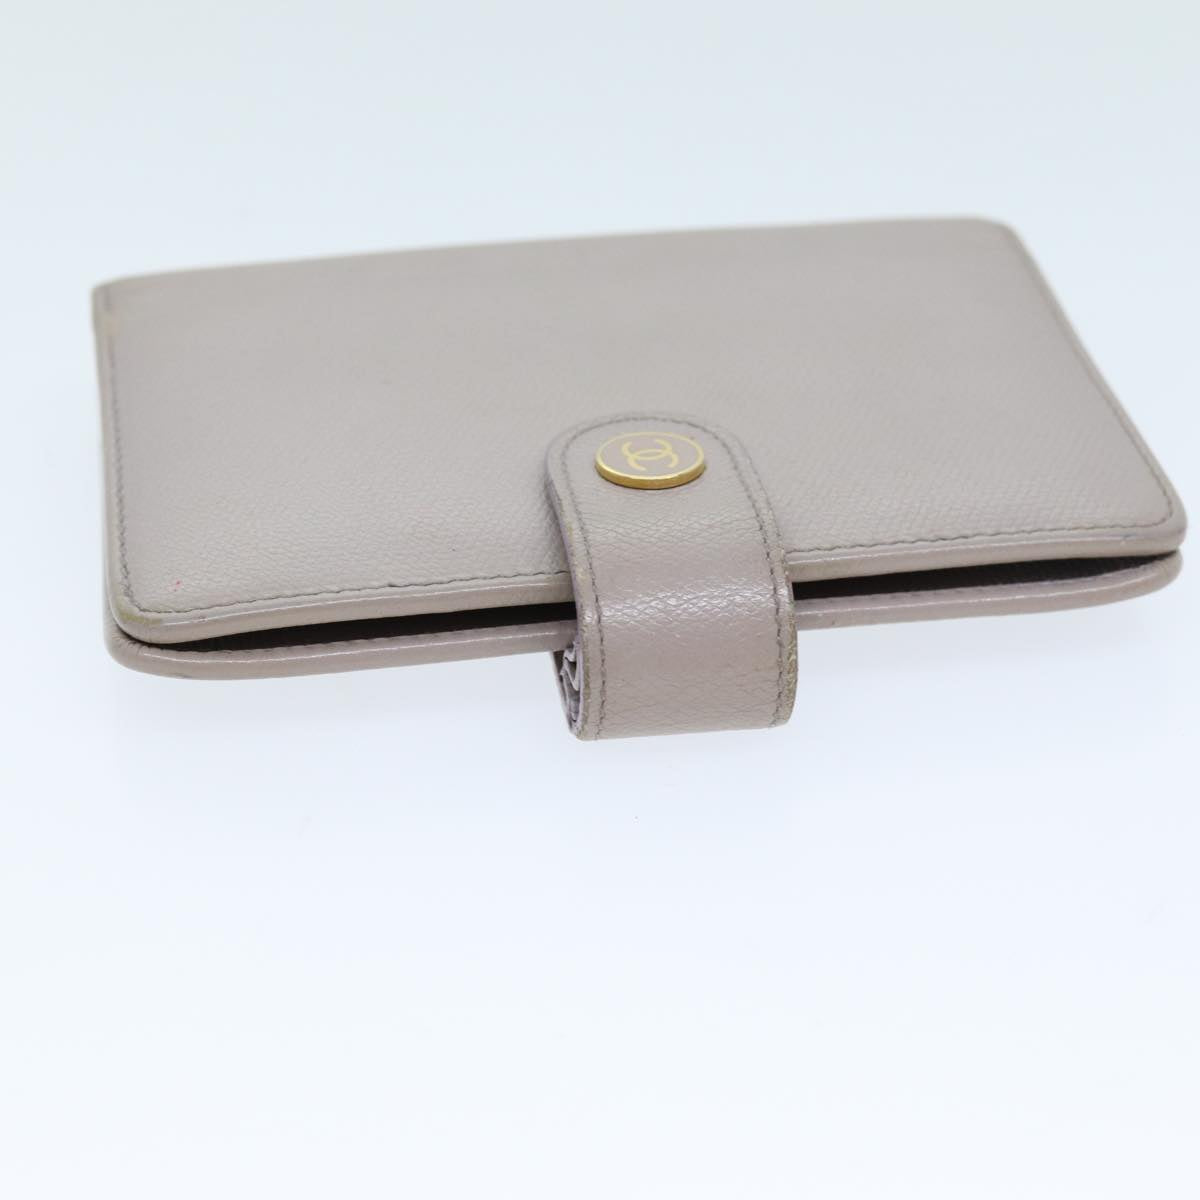 CHANEL Day Planner Cover Leather Gray CC Auth am6197